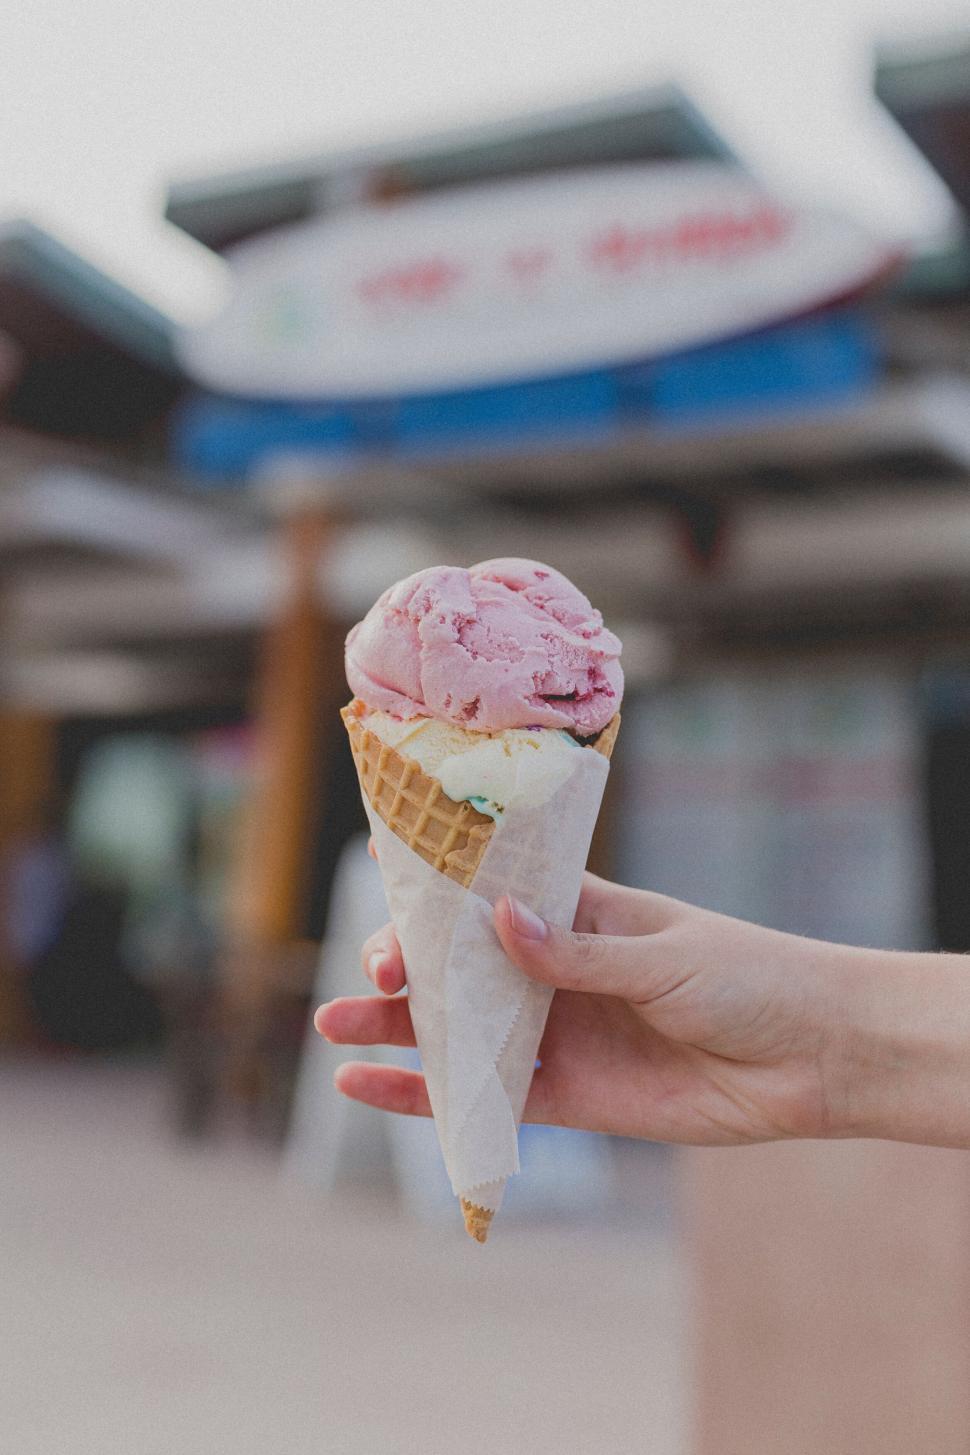 Free Image of Hand holding a melting ice cream cone 